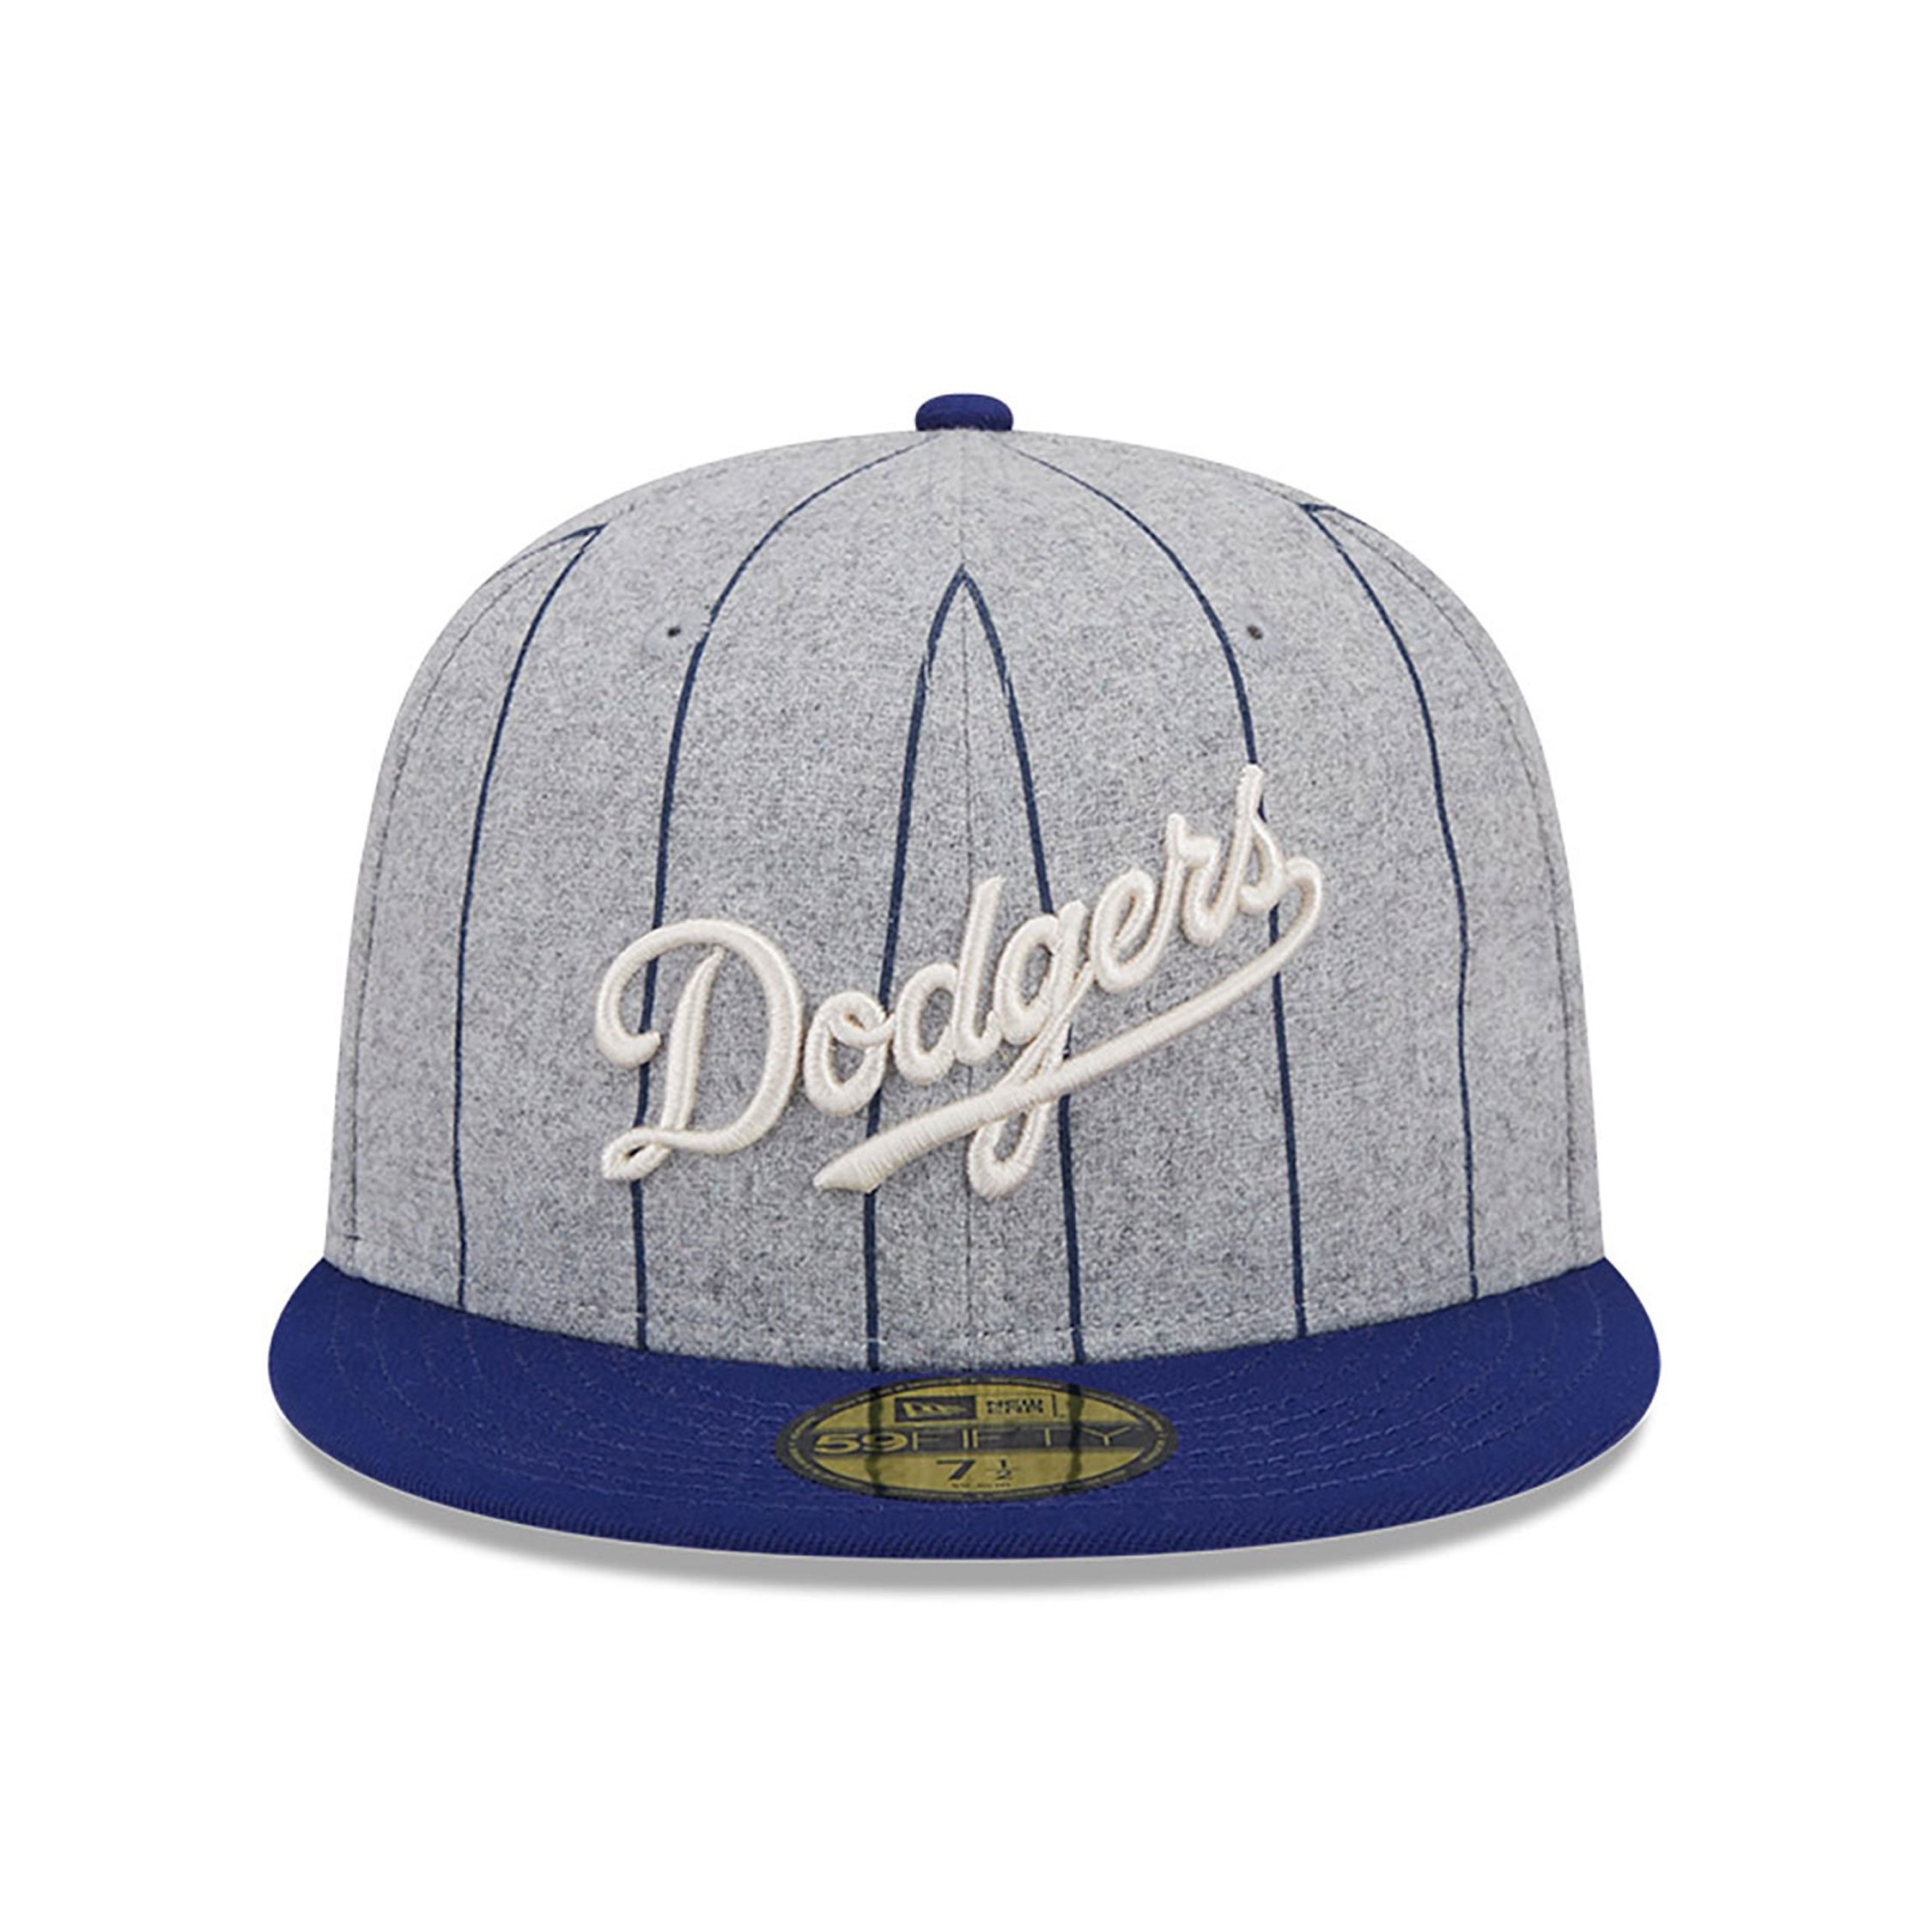 LA Dodgers Heather Pinstripe Grey 59FIFTY Fitted Cap